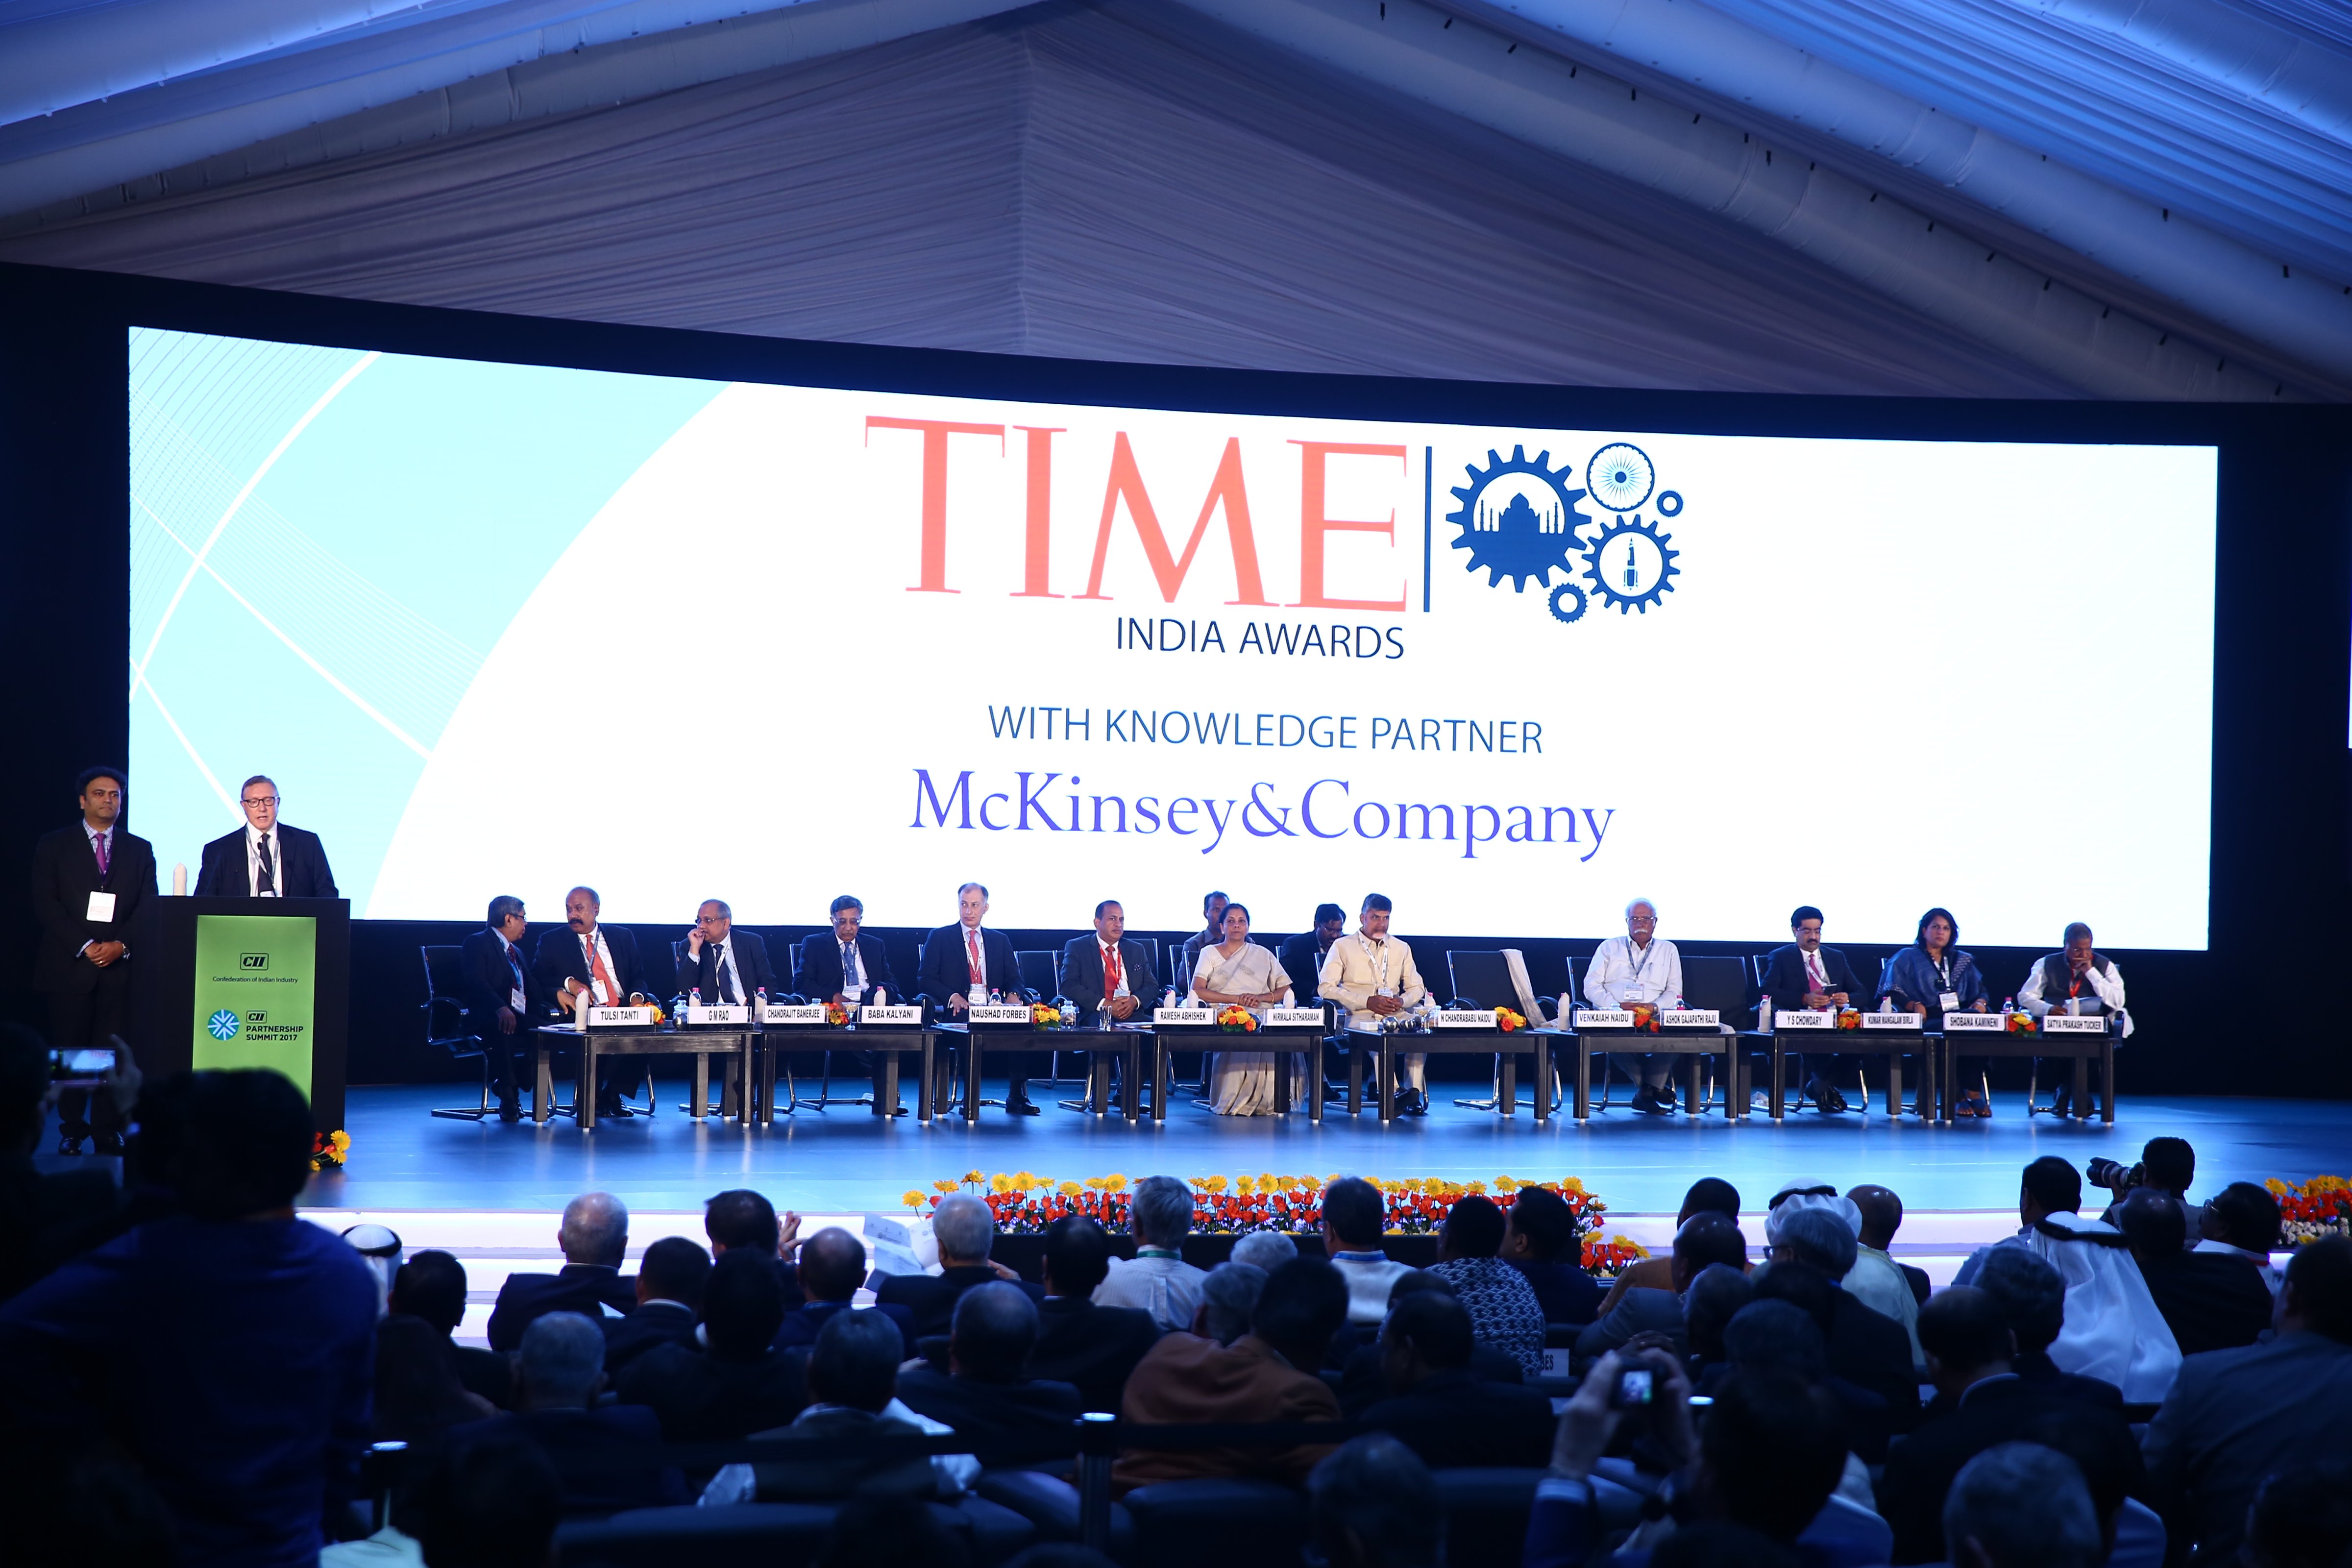 Time Inc.'s Norman Pearlstine and McKinsey &amp; Co.'s Rajat Dhawan present the 2017 Time India Awards (CII)